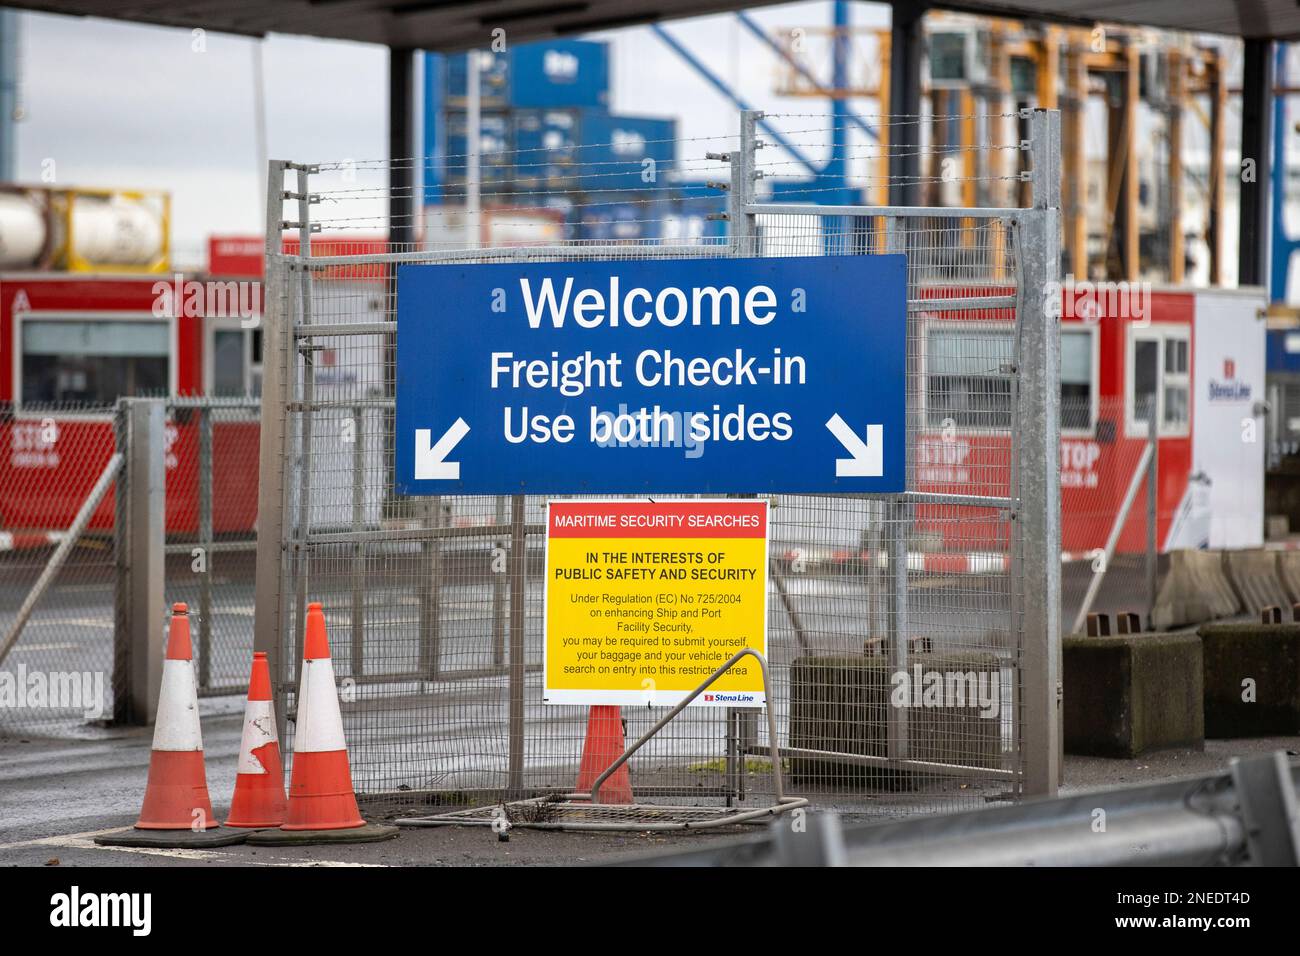 Freight check-in sign at the Stena Line terminal at the Port of Belfast. Any deal on the Northern Ireland Protocol that does not repair the 'constitutional damage' it has caused will fail to convince the DUP to return to powersharing, a senior party figure has warned. MP Sammy Wilson said the fundamental issue that needed confronting was the 'democratic deficit' created by Northern Ireland being subject to EU rules over which local politicians had no influence on. Stock Photo